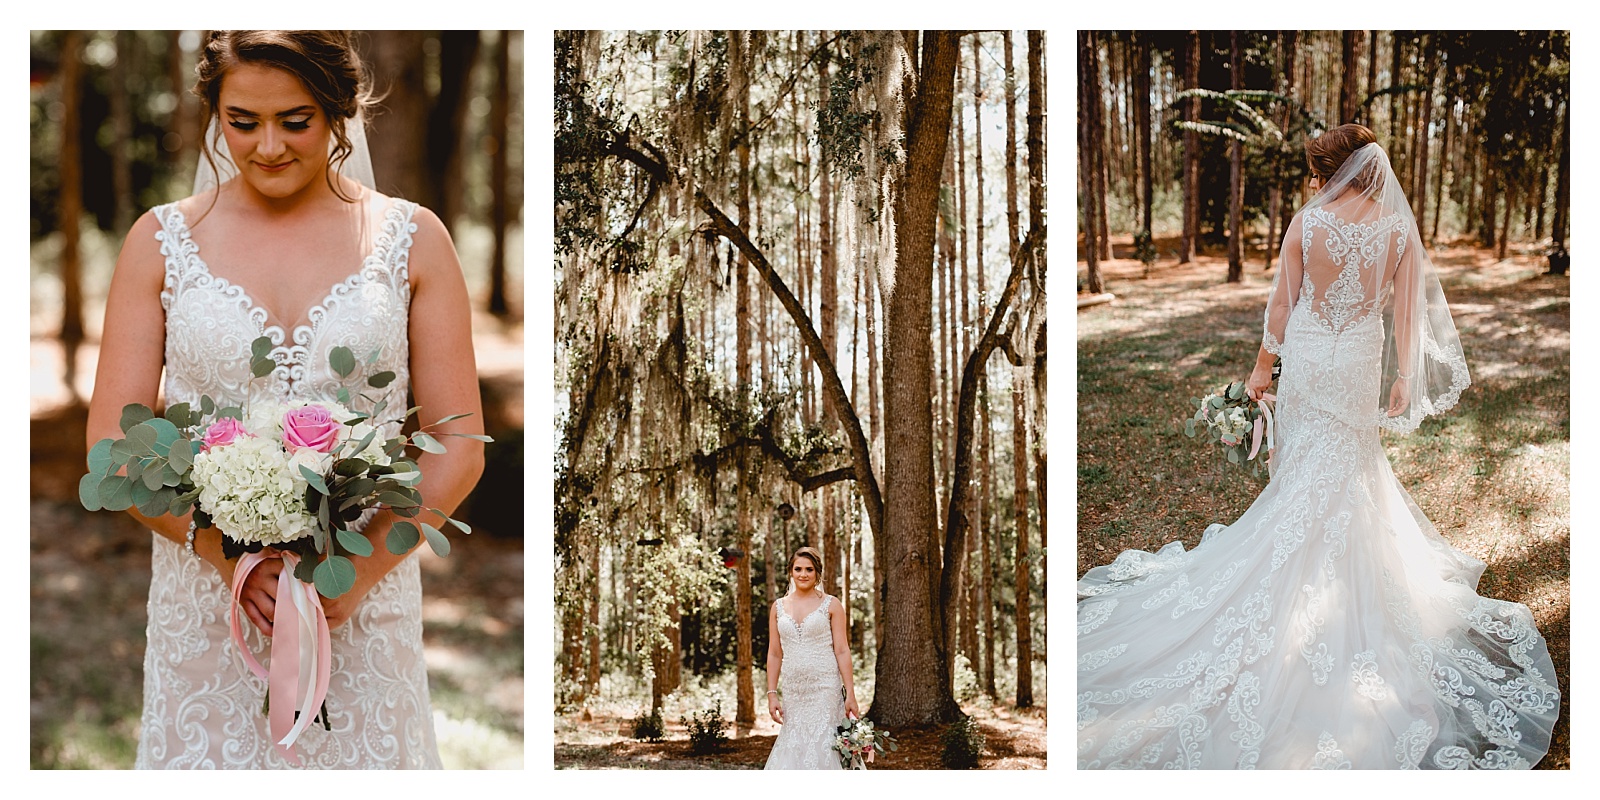 Portraits of the bride on her big day. Shelly Williams Photography